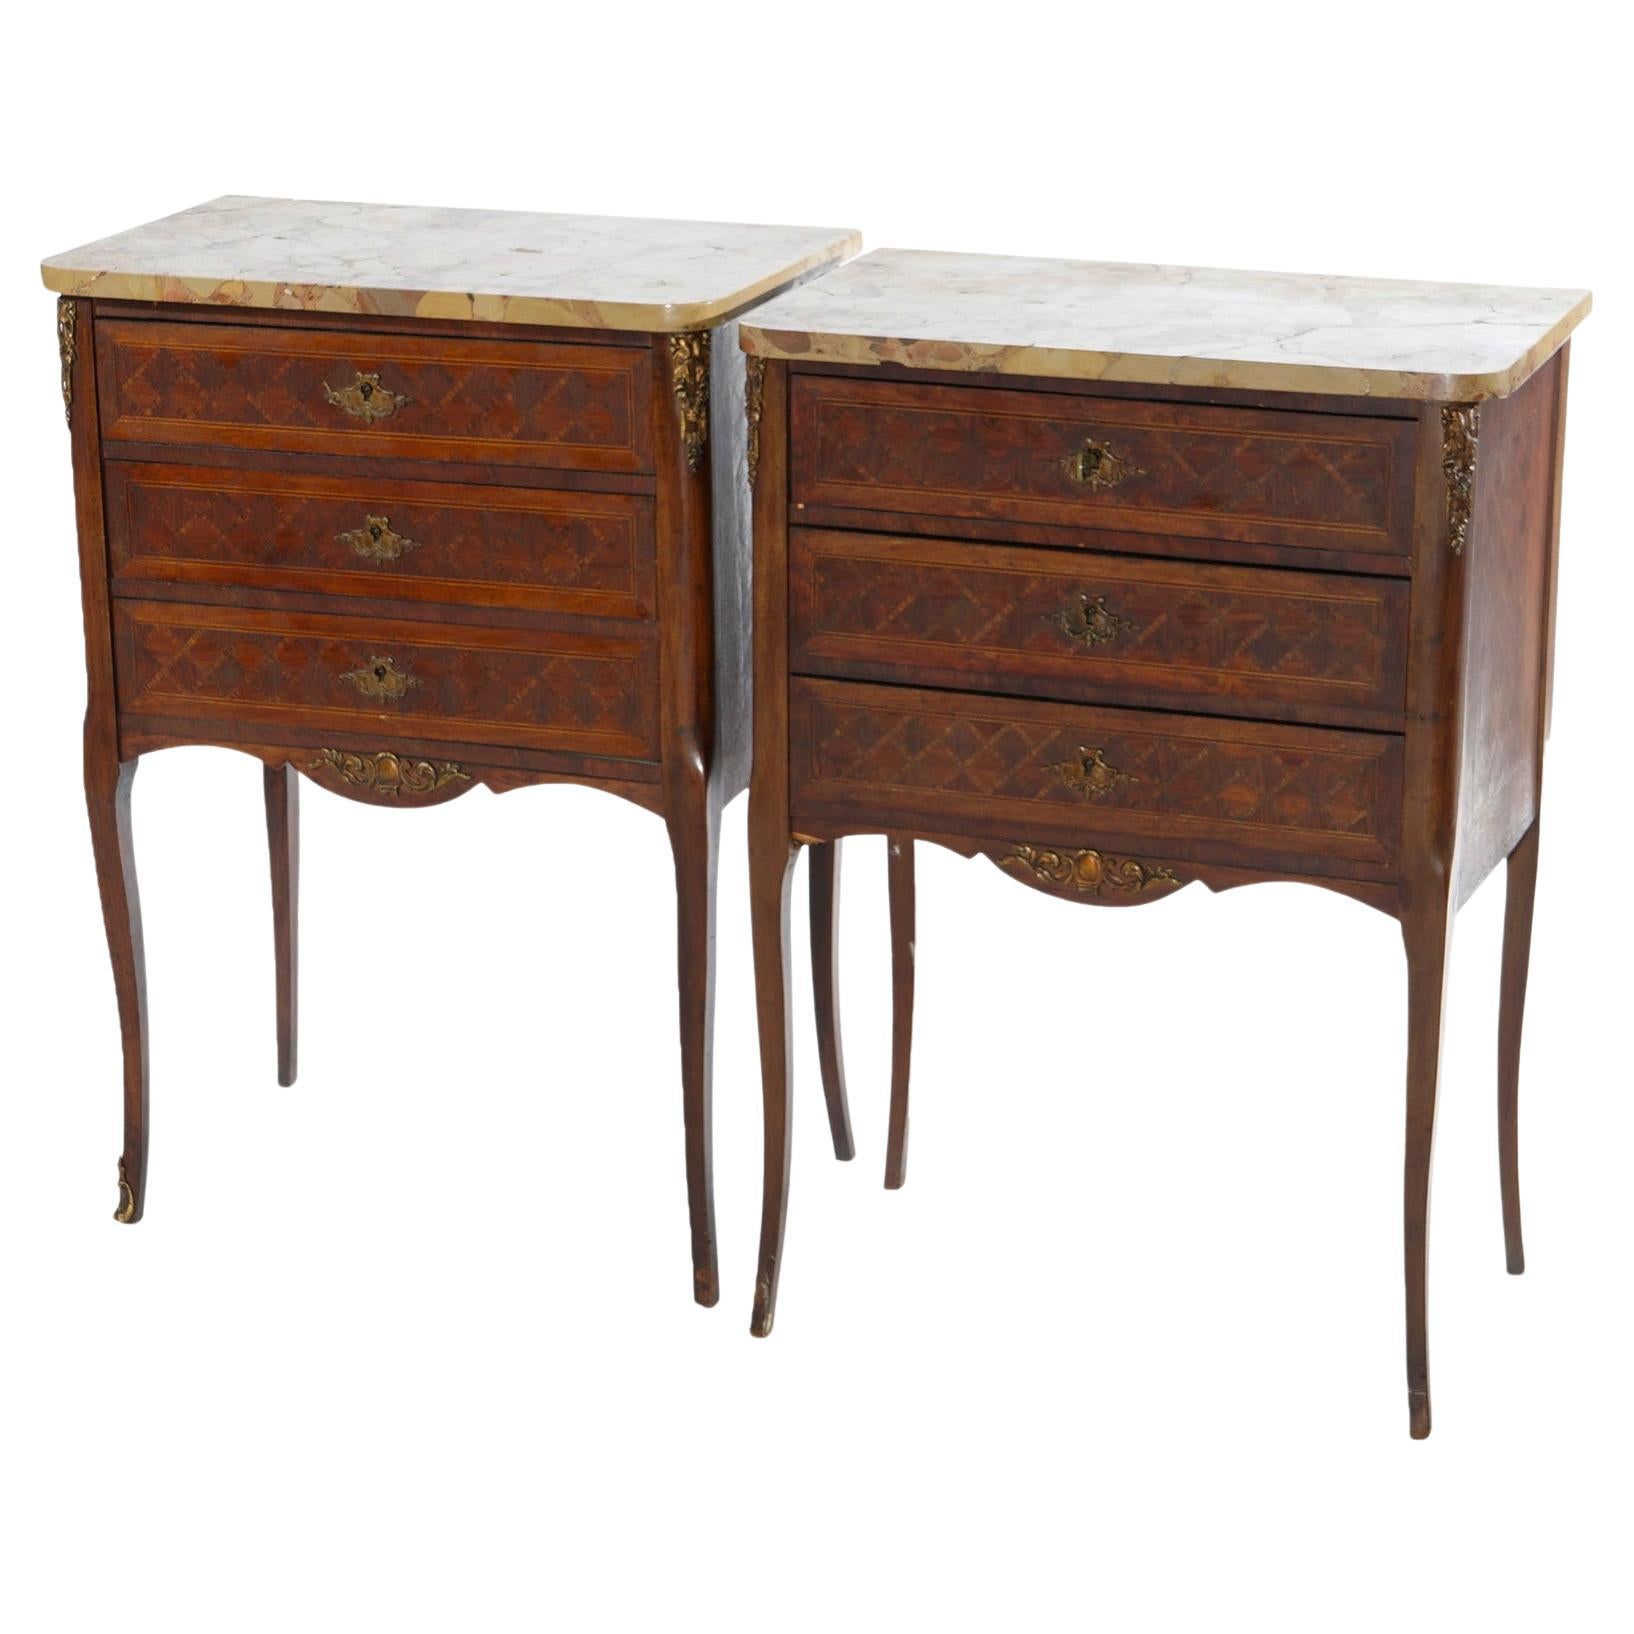 Antique Pair French Kingwood Satinwood Inlaid Marble Top Side Tables circa 1910 For Sale